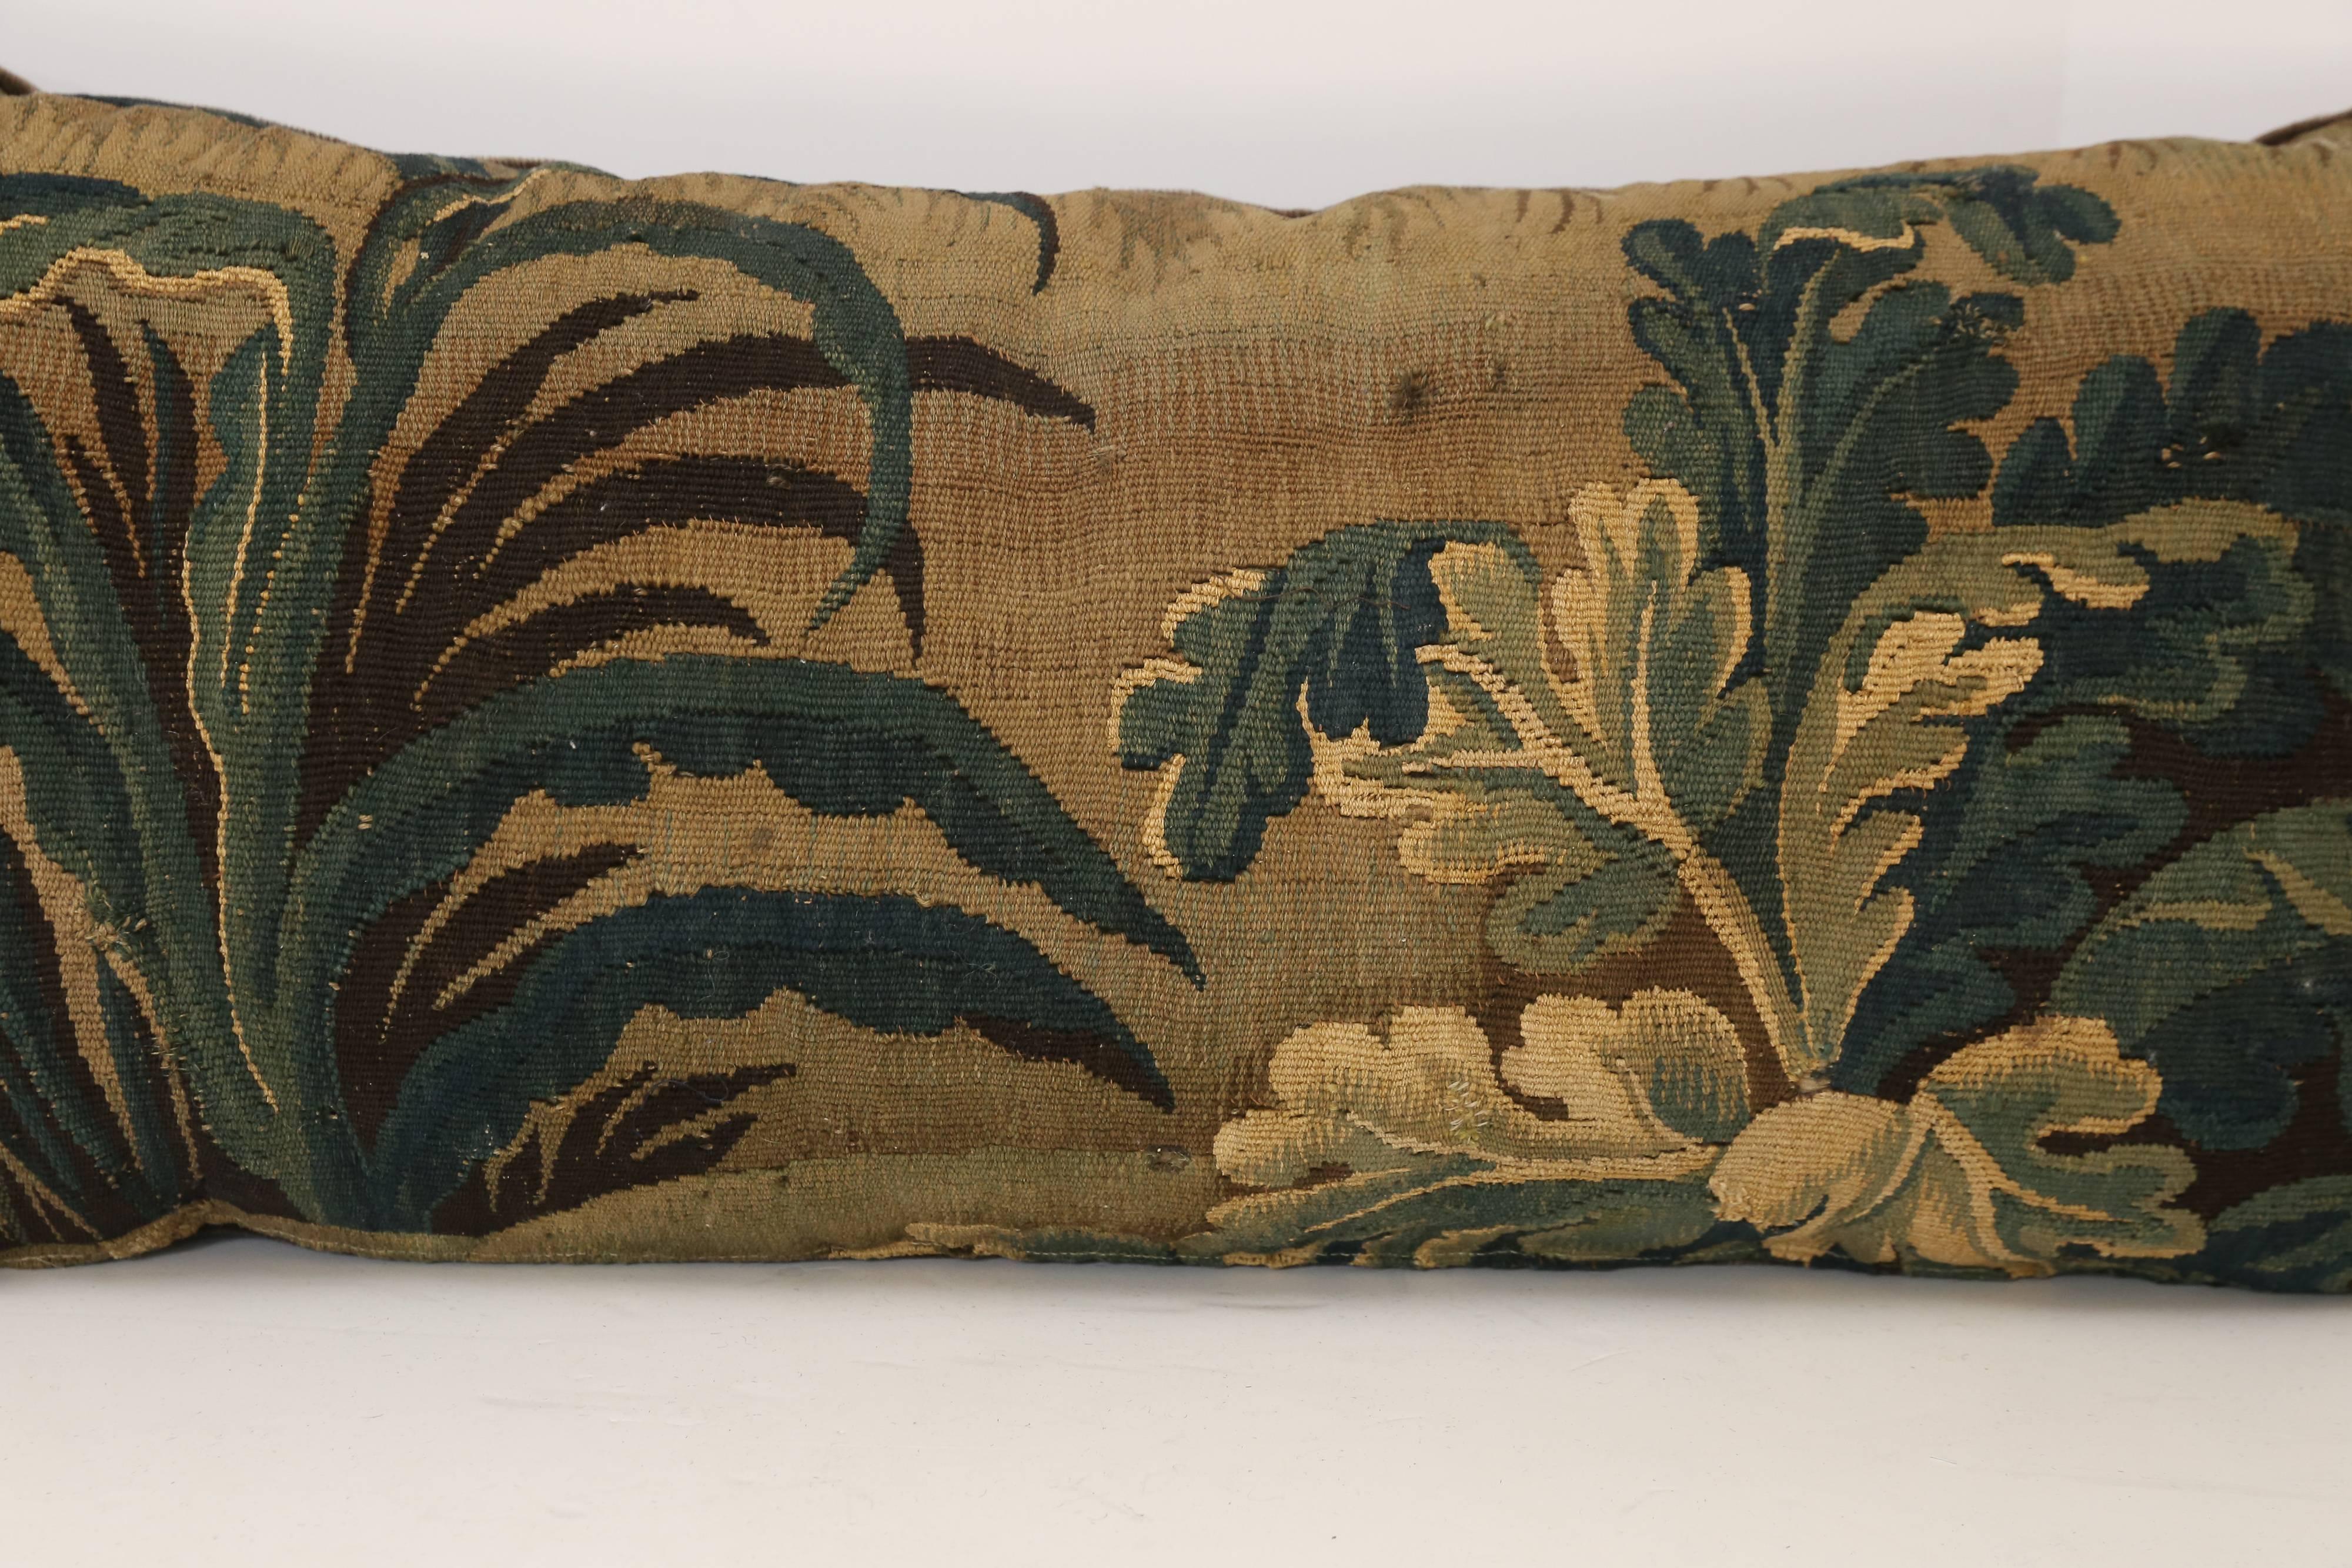 18th century Aubusson pillow backed in Mohair.